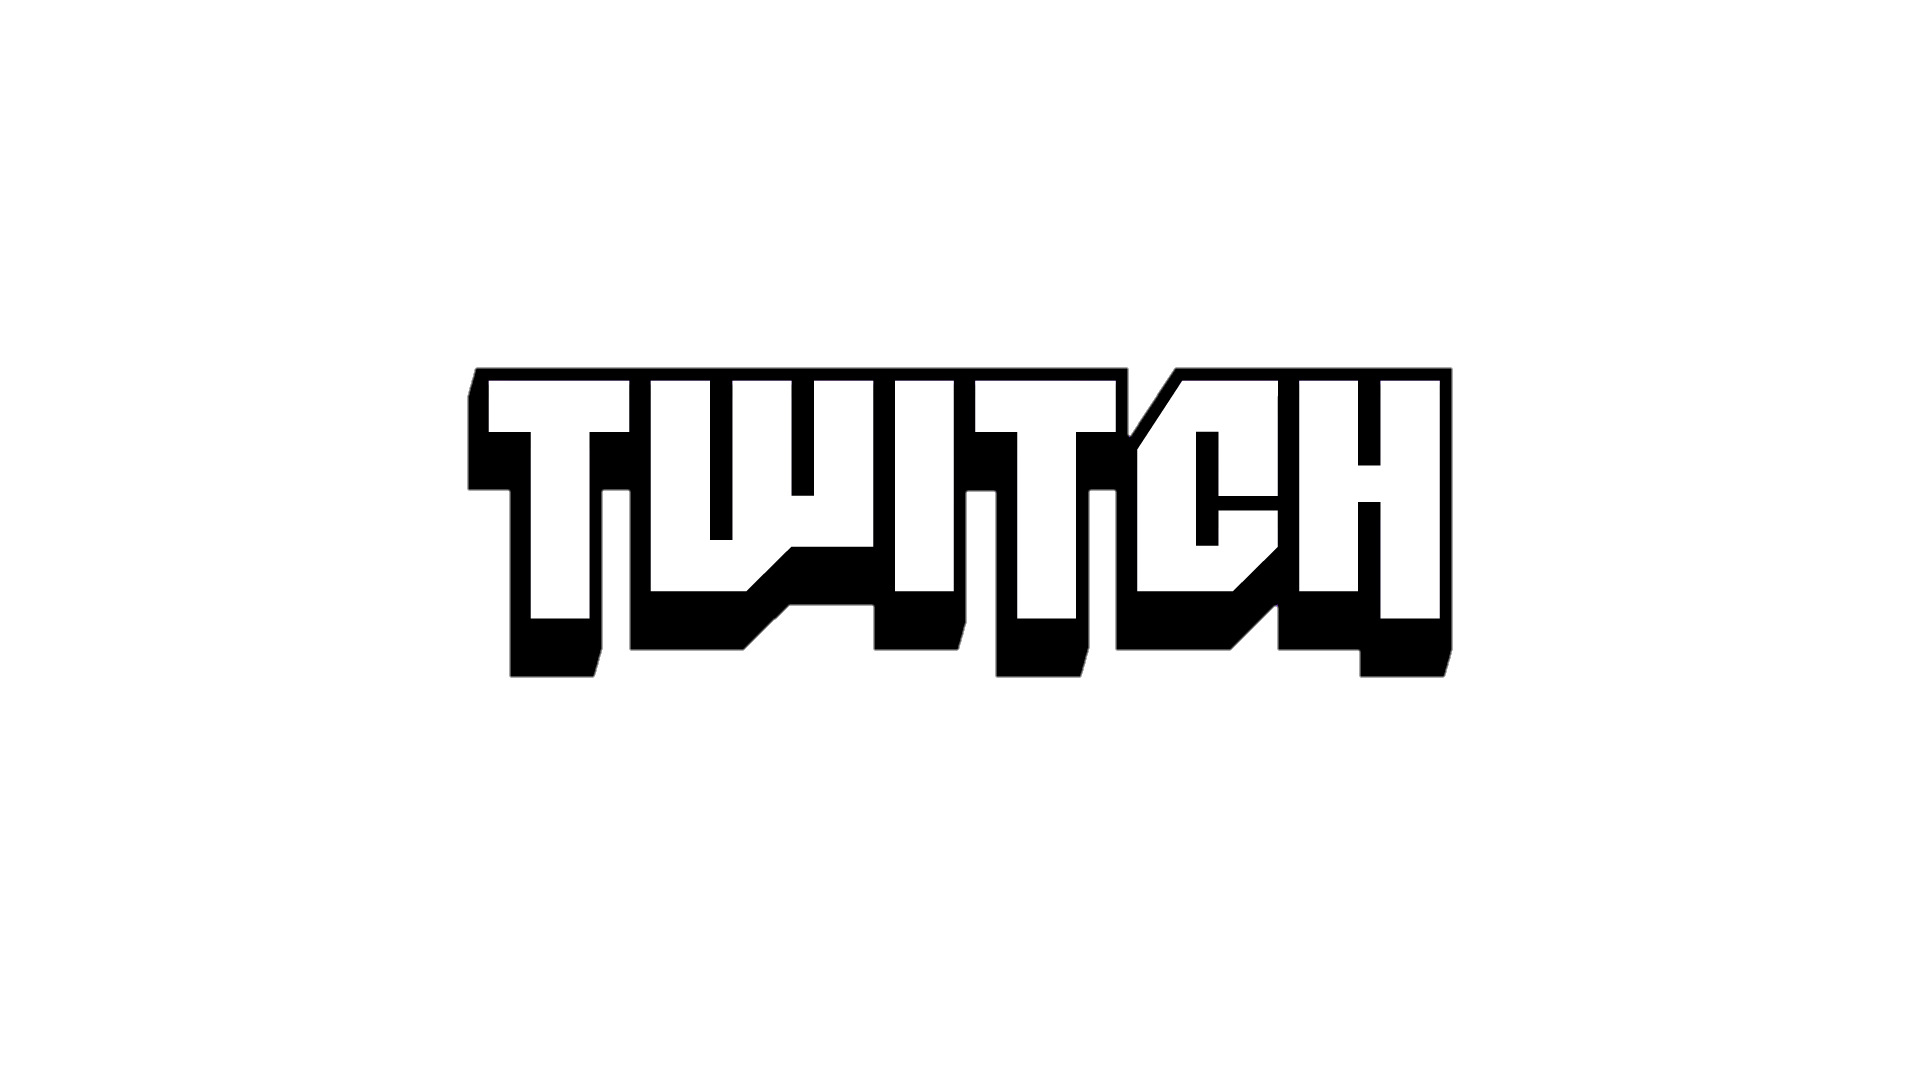 twitch-logo-png-from-pngfre-31